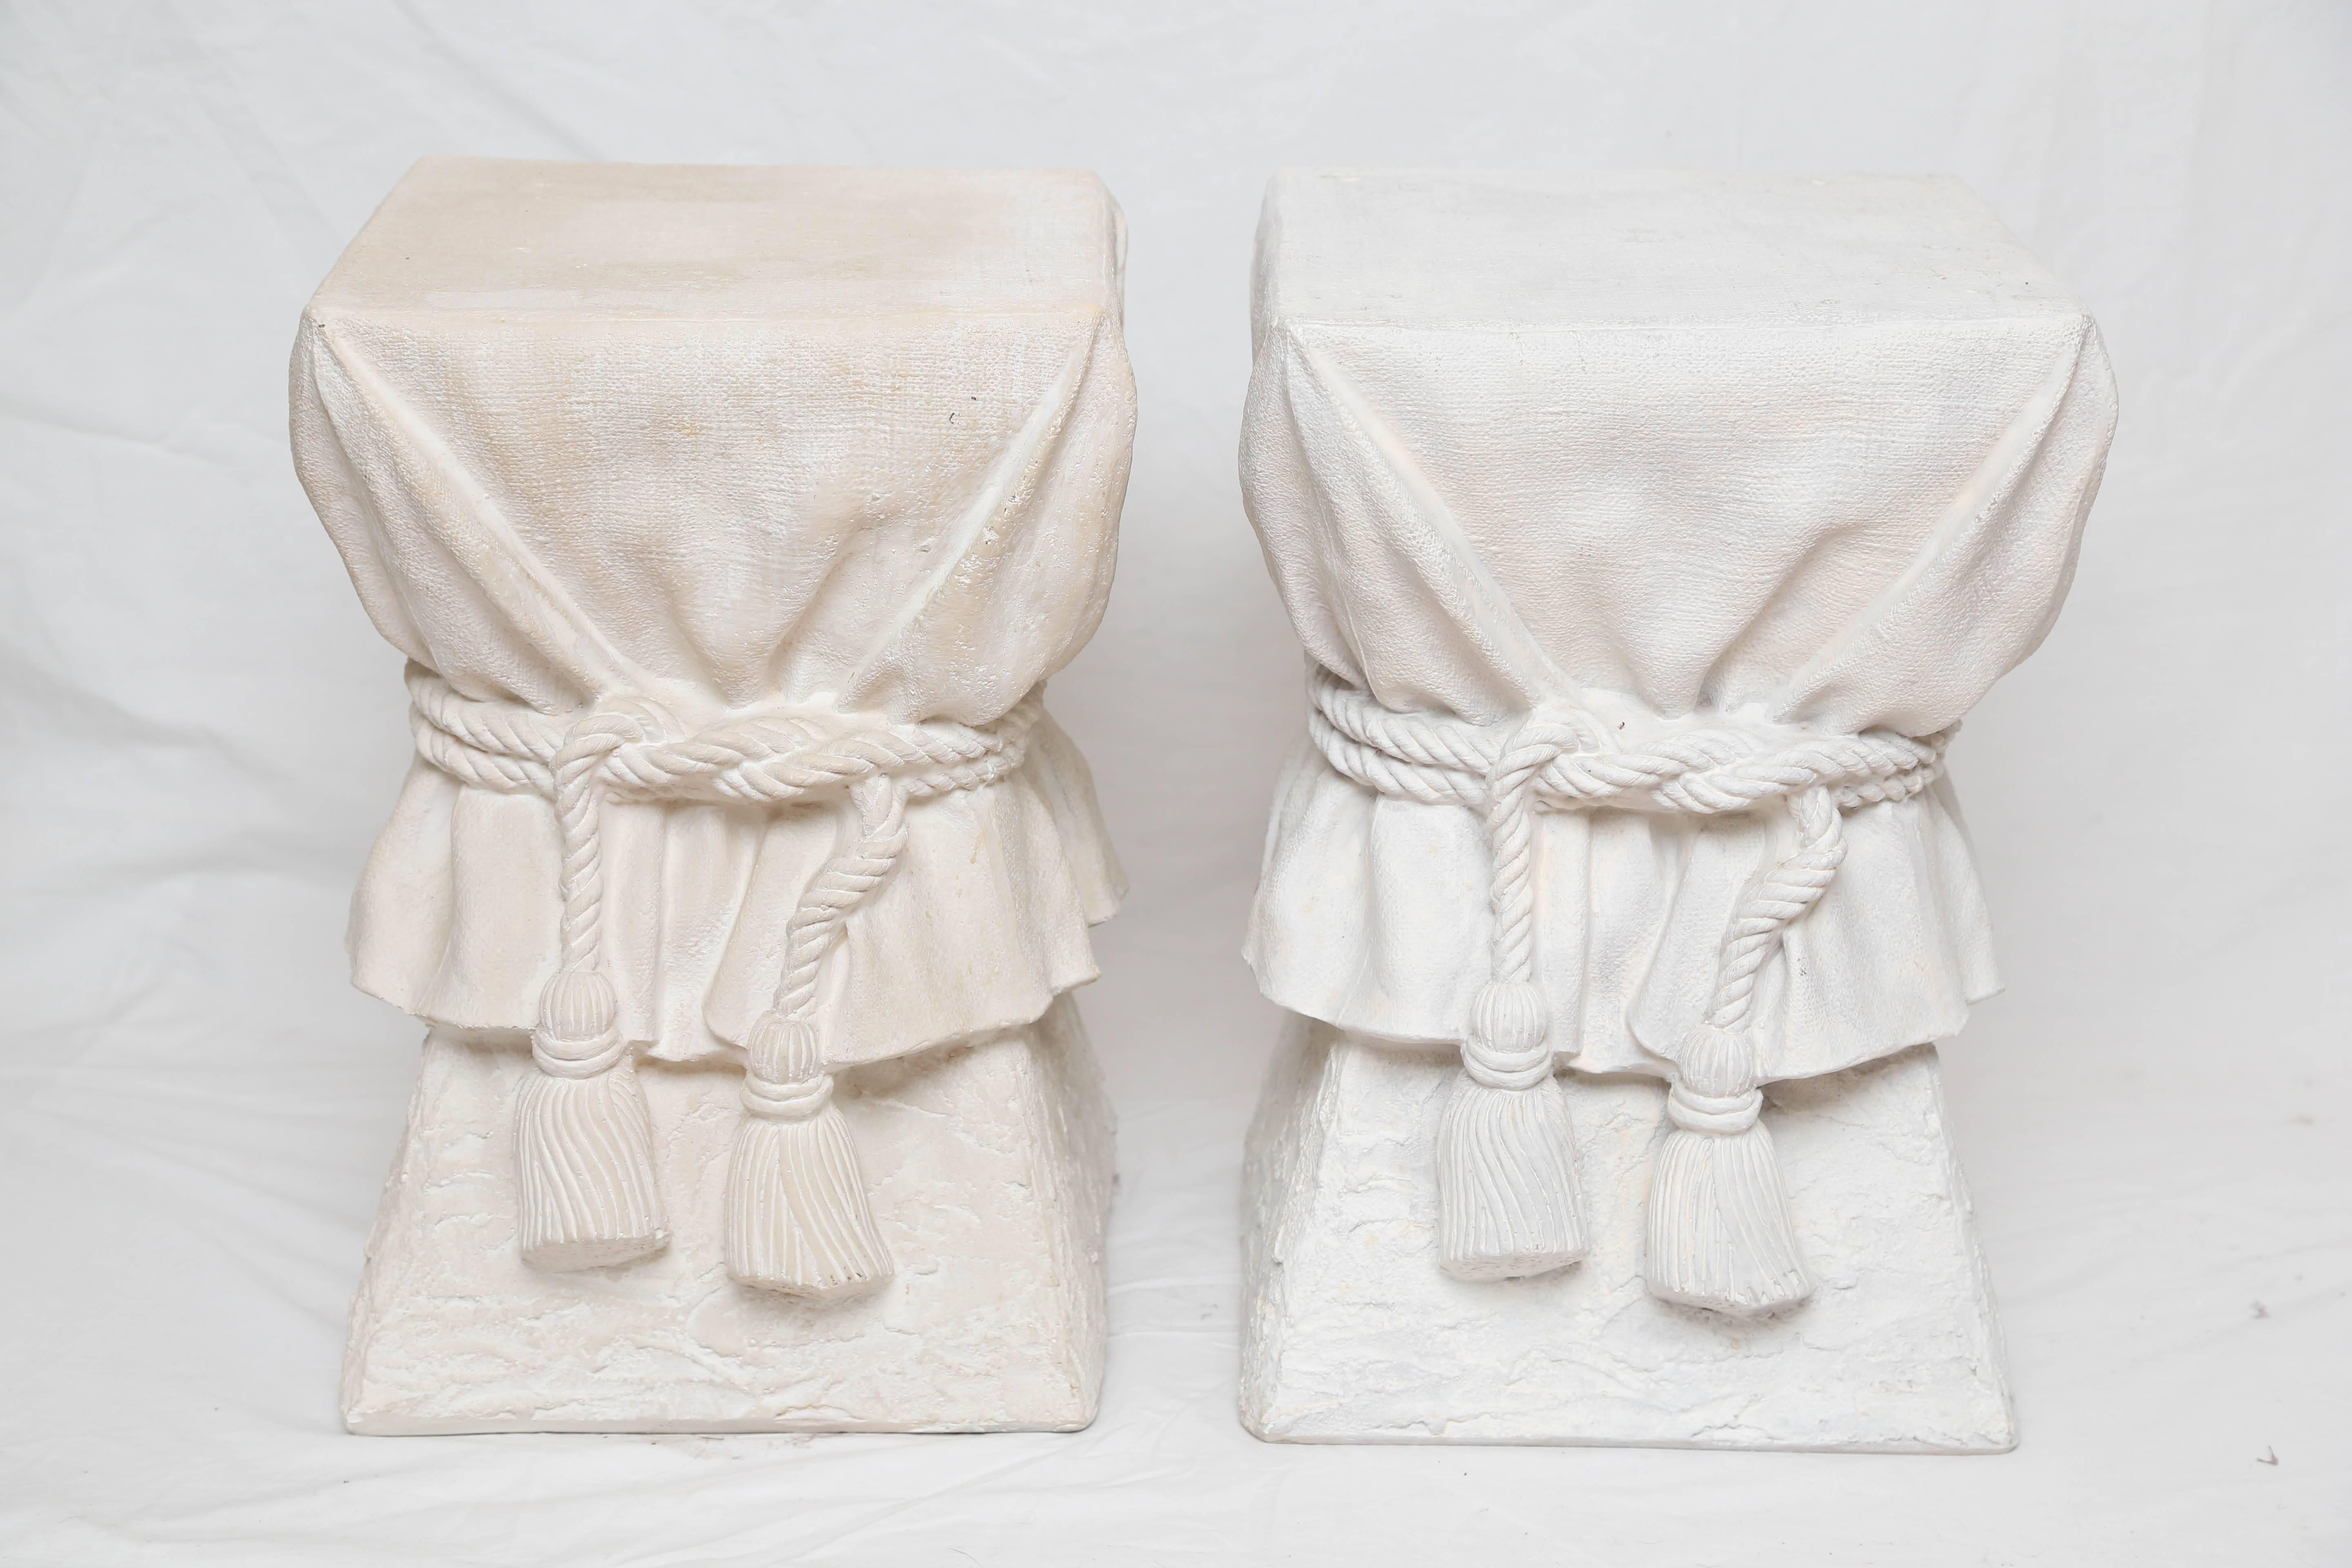 Pair of white tasseled plaster end tables attributed to John Dickinson.